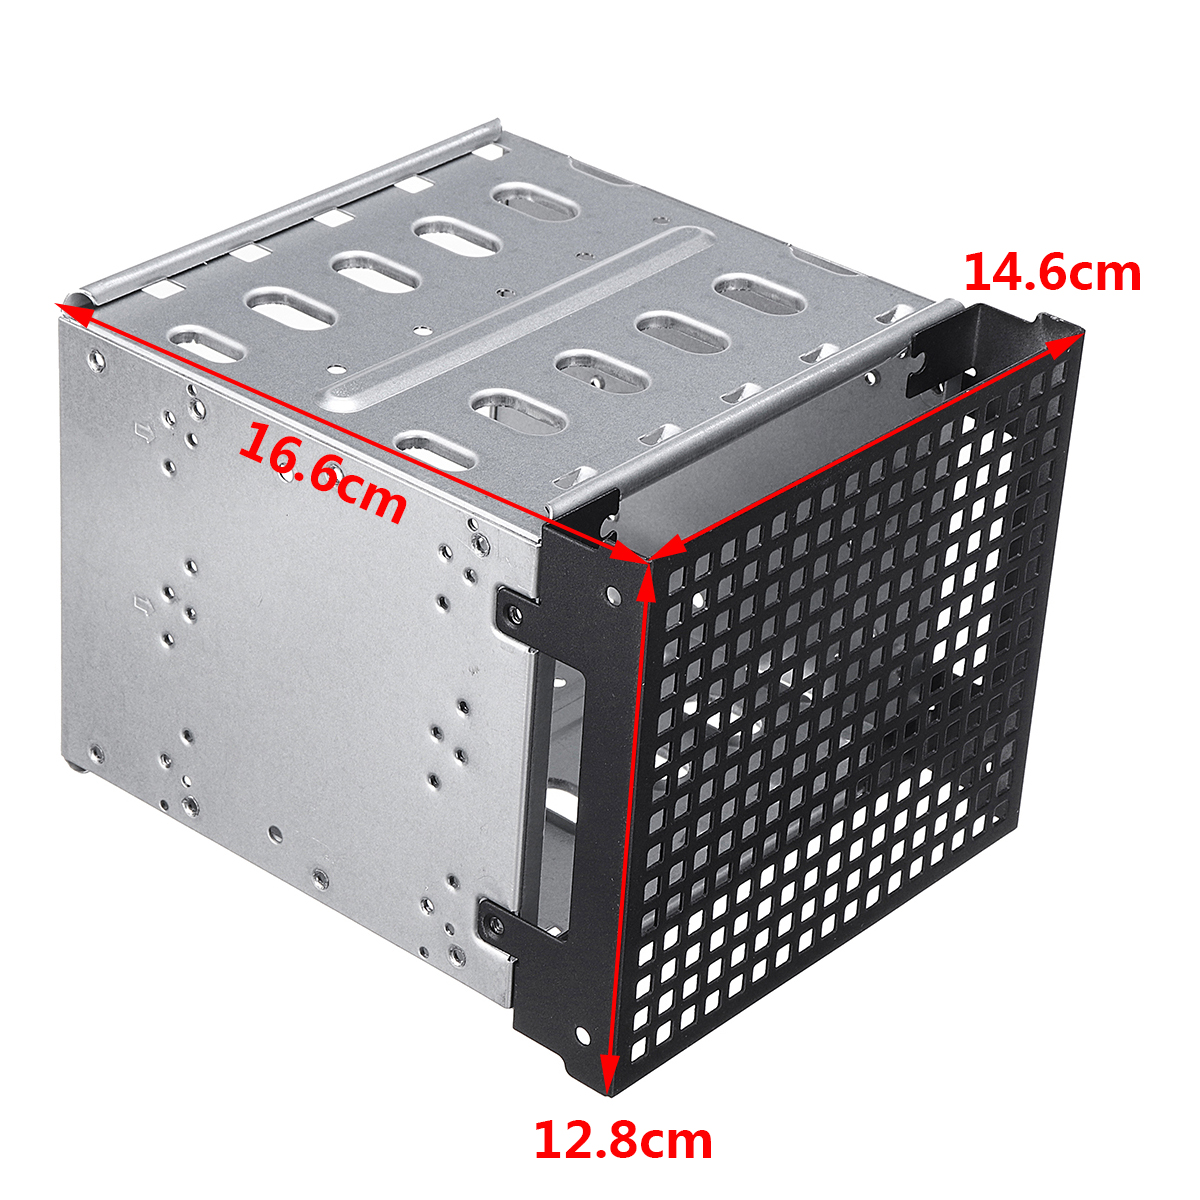 5.25" to 5x 3.5" SATA SAS HDD Cage Rack Hard Drive Tray Caddy Converter with Fan Space 51